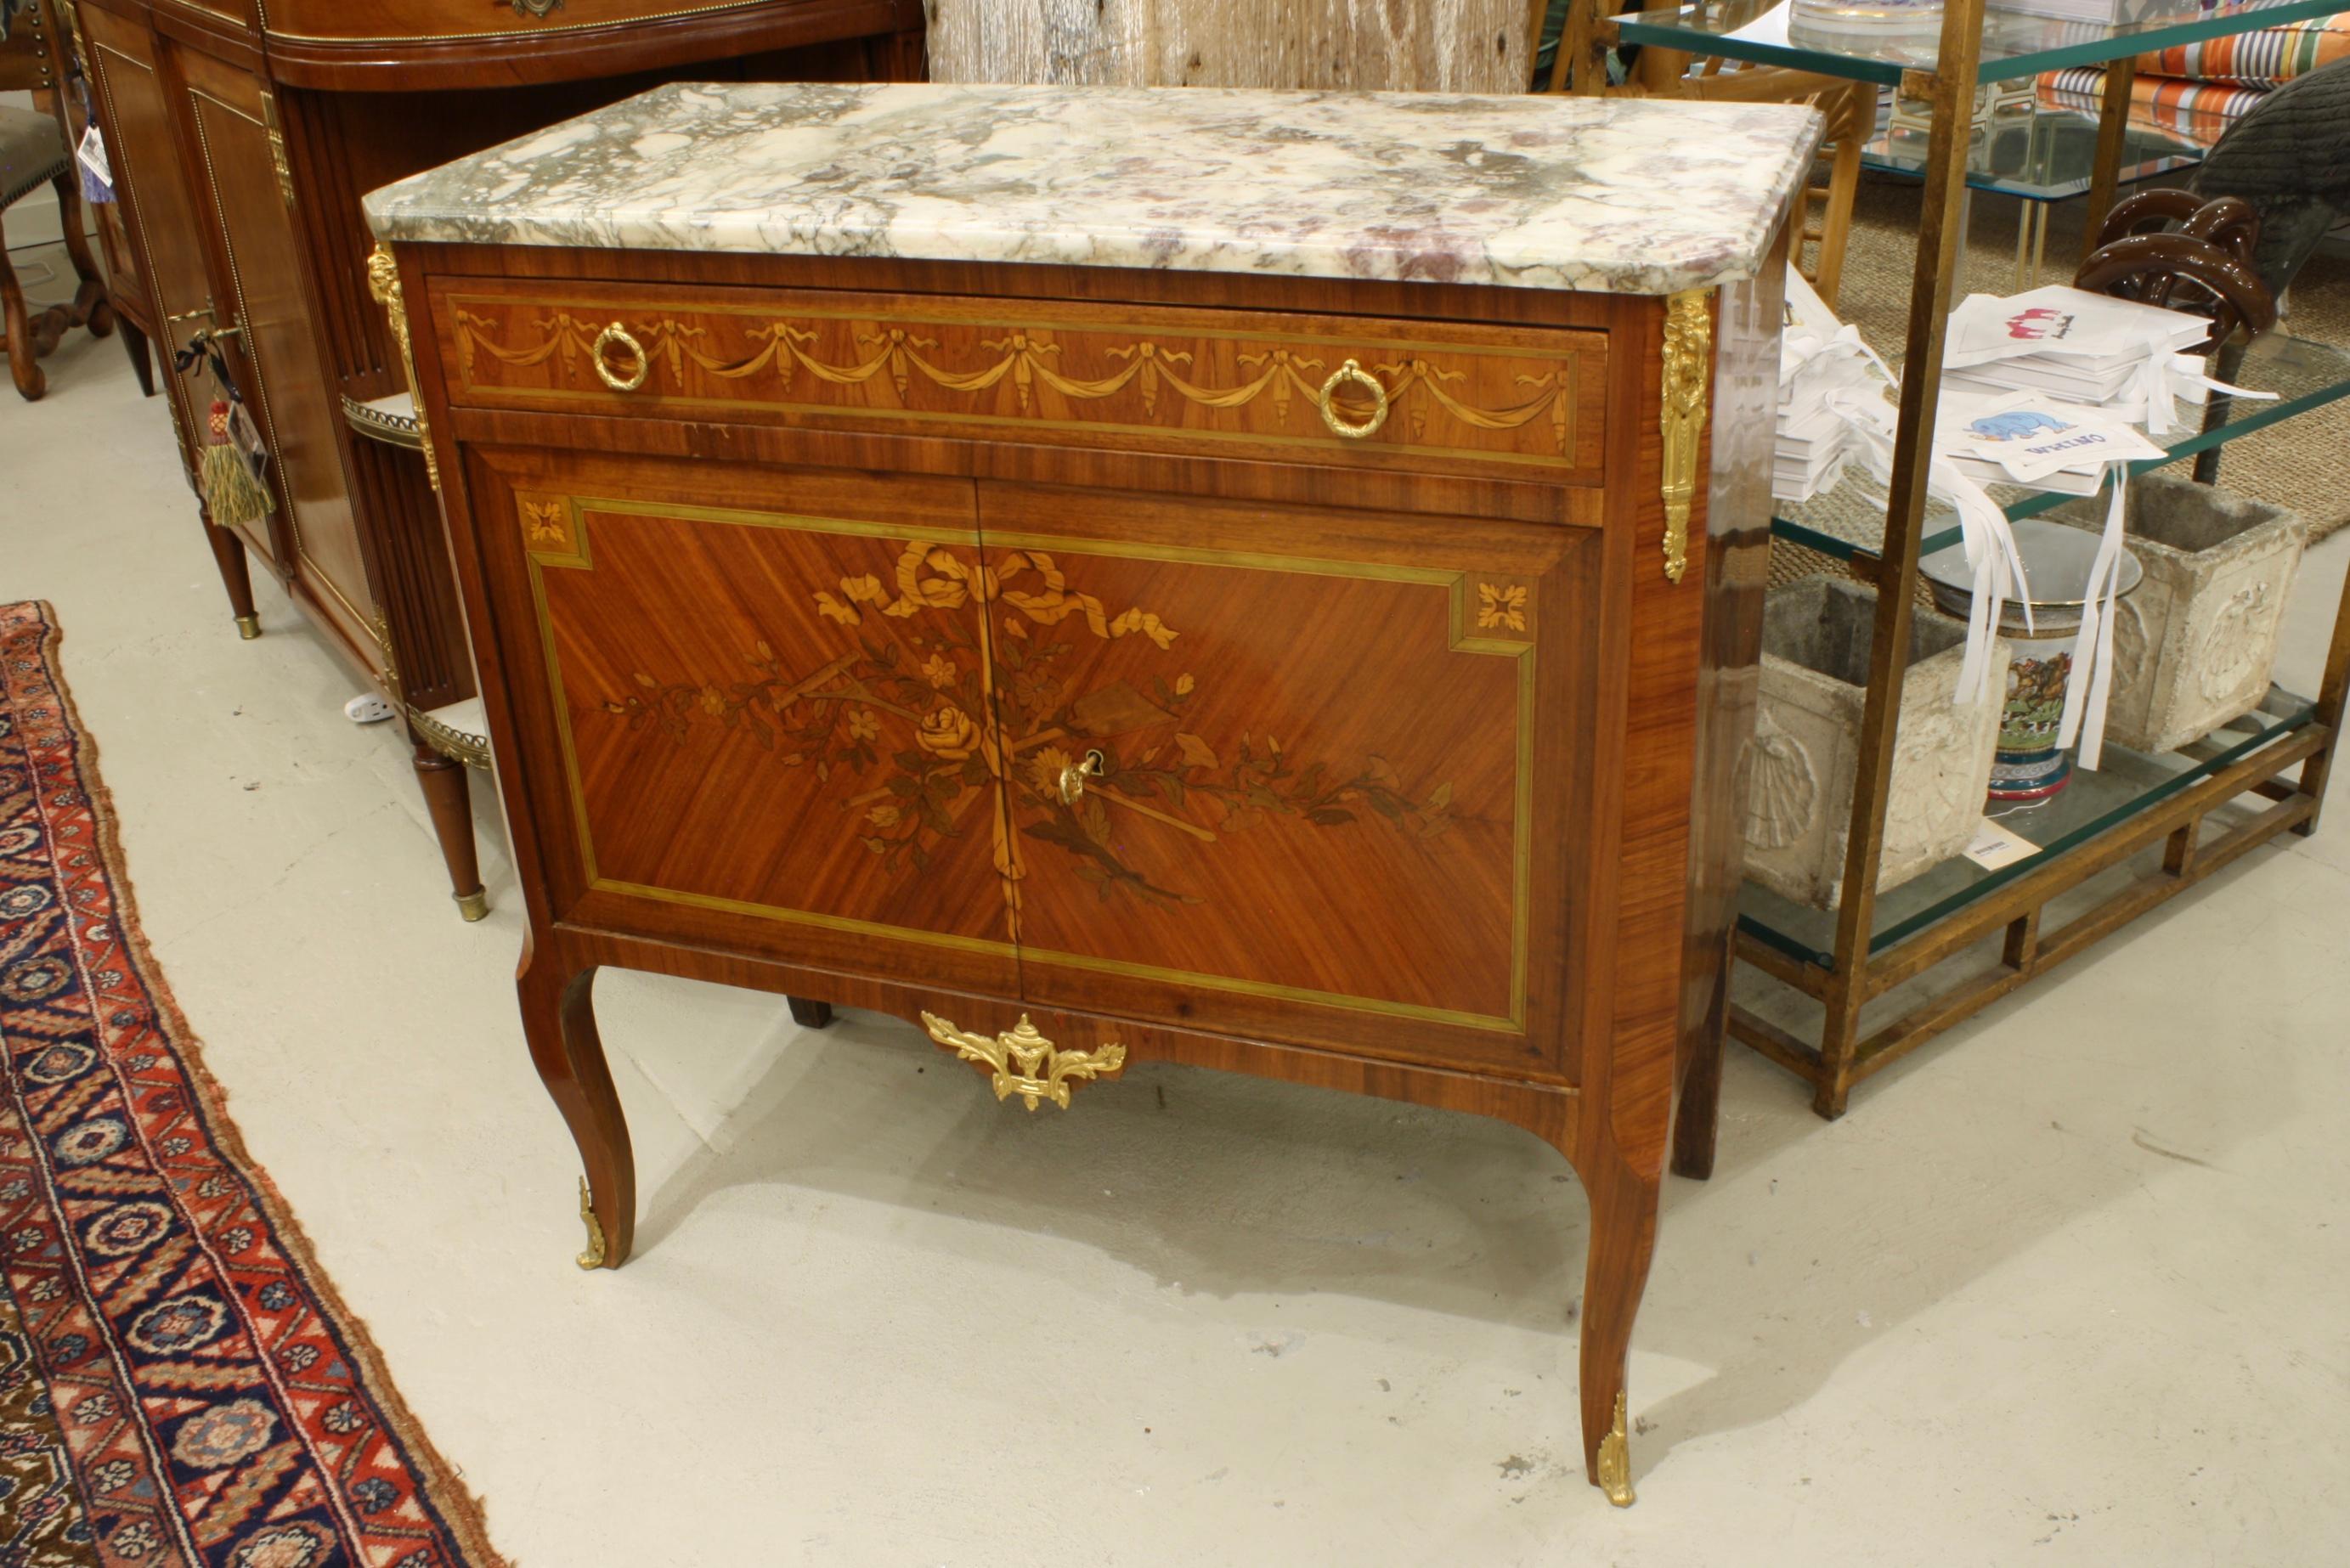 French Louis XV / Louis XVI Transitional style commode with breche violet marble top (Napoleon III period, circa 1870). This commode features floral marquetry with garden tools (rake and shovel) and rose garlands on the cabinet doors, and